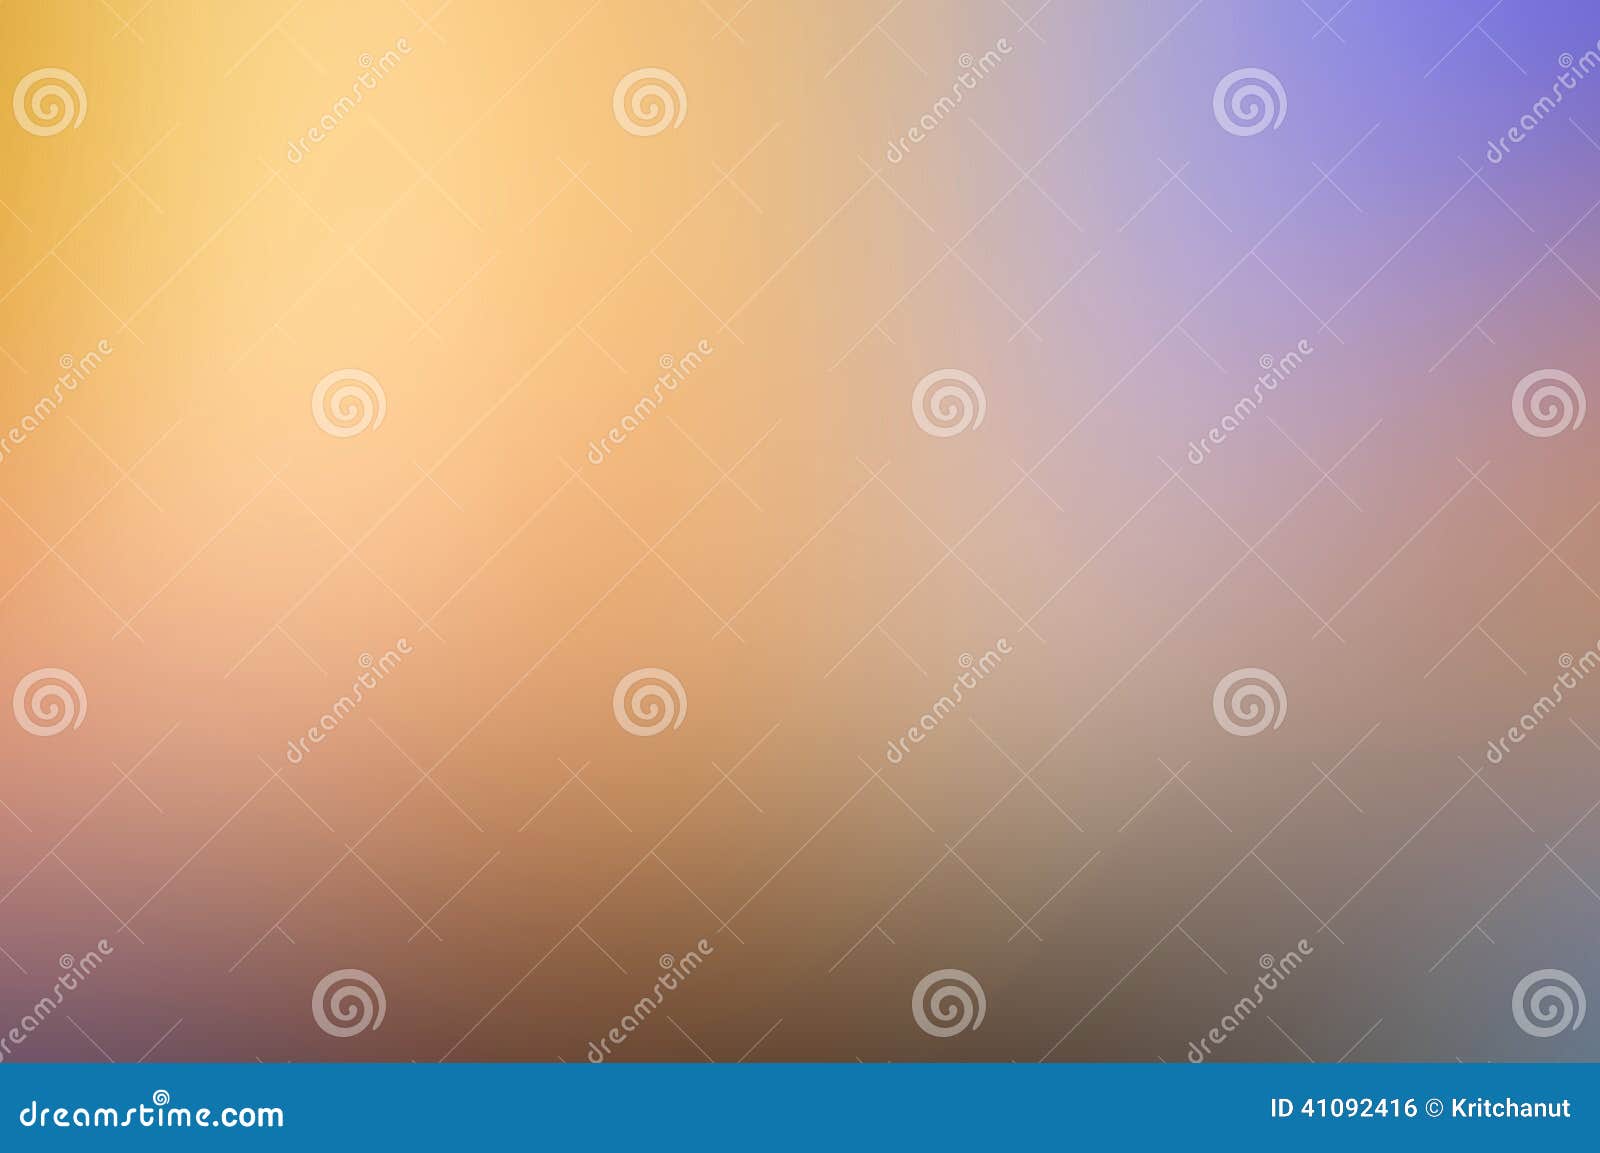 smooth multicolor gradient abstract background